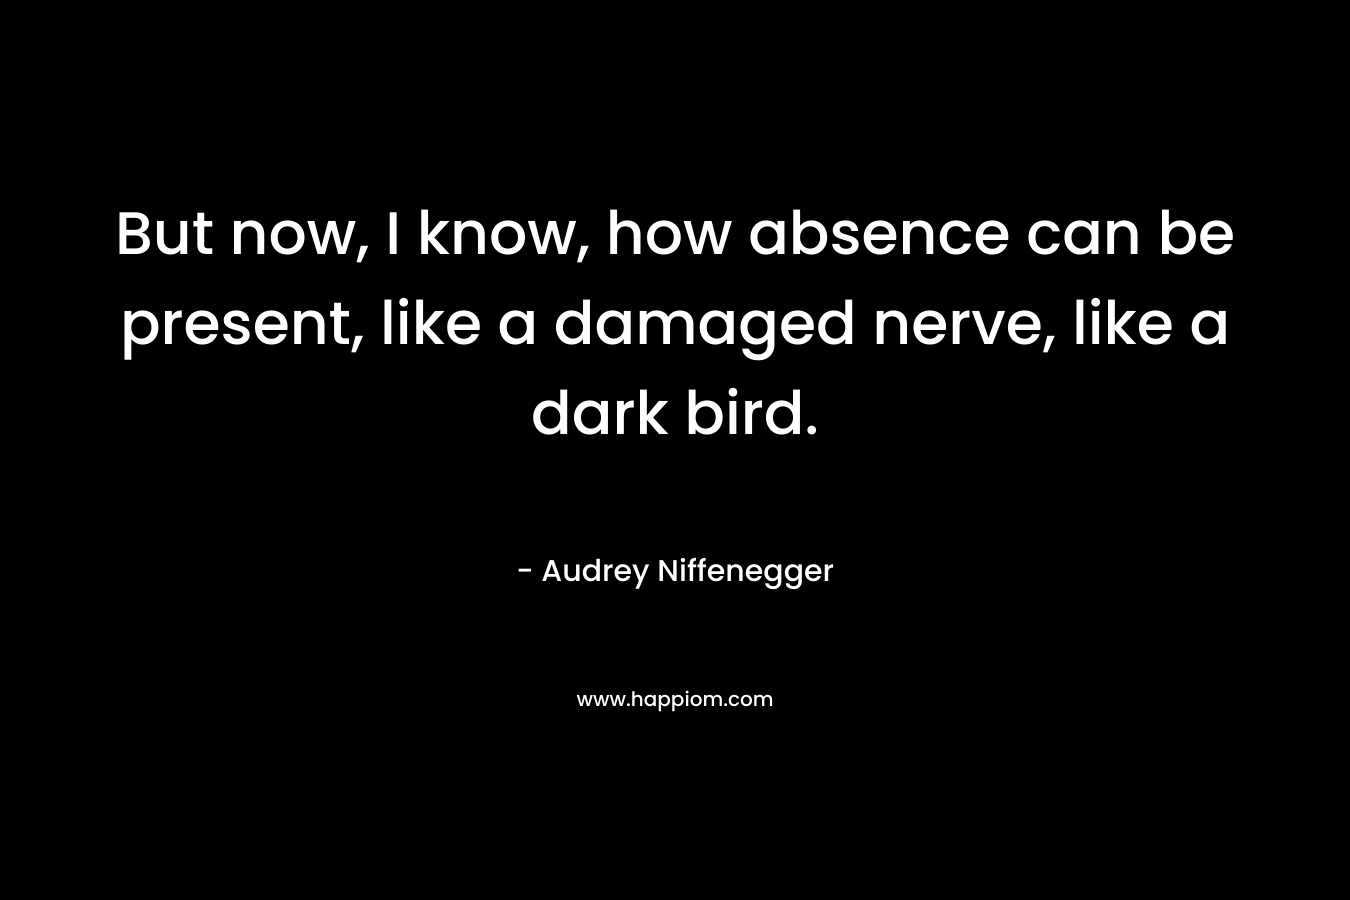 But now, I know, how absence can be present, like a damaged nerve, like a dark bird.